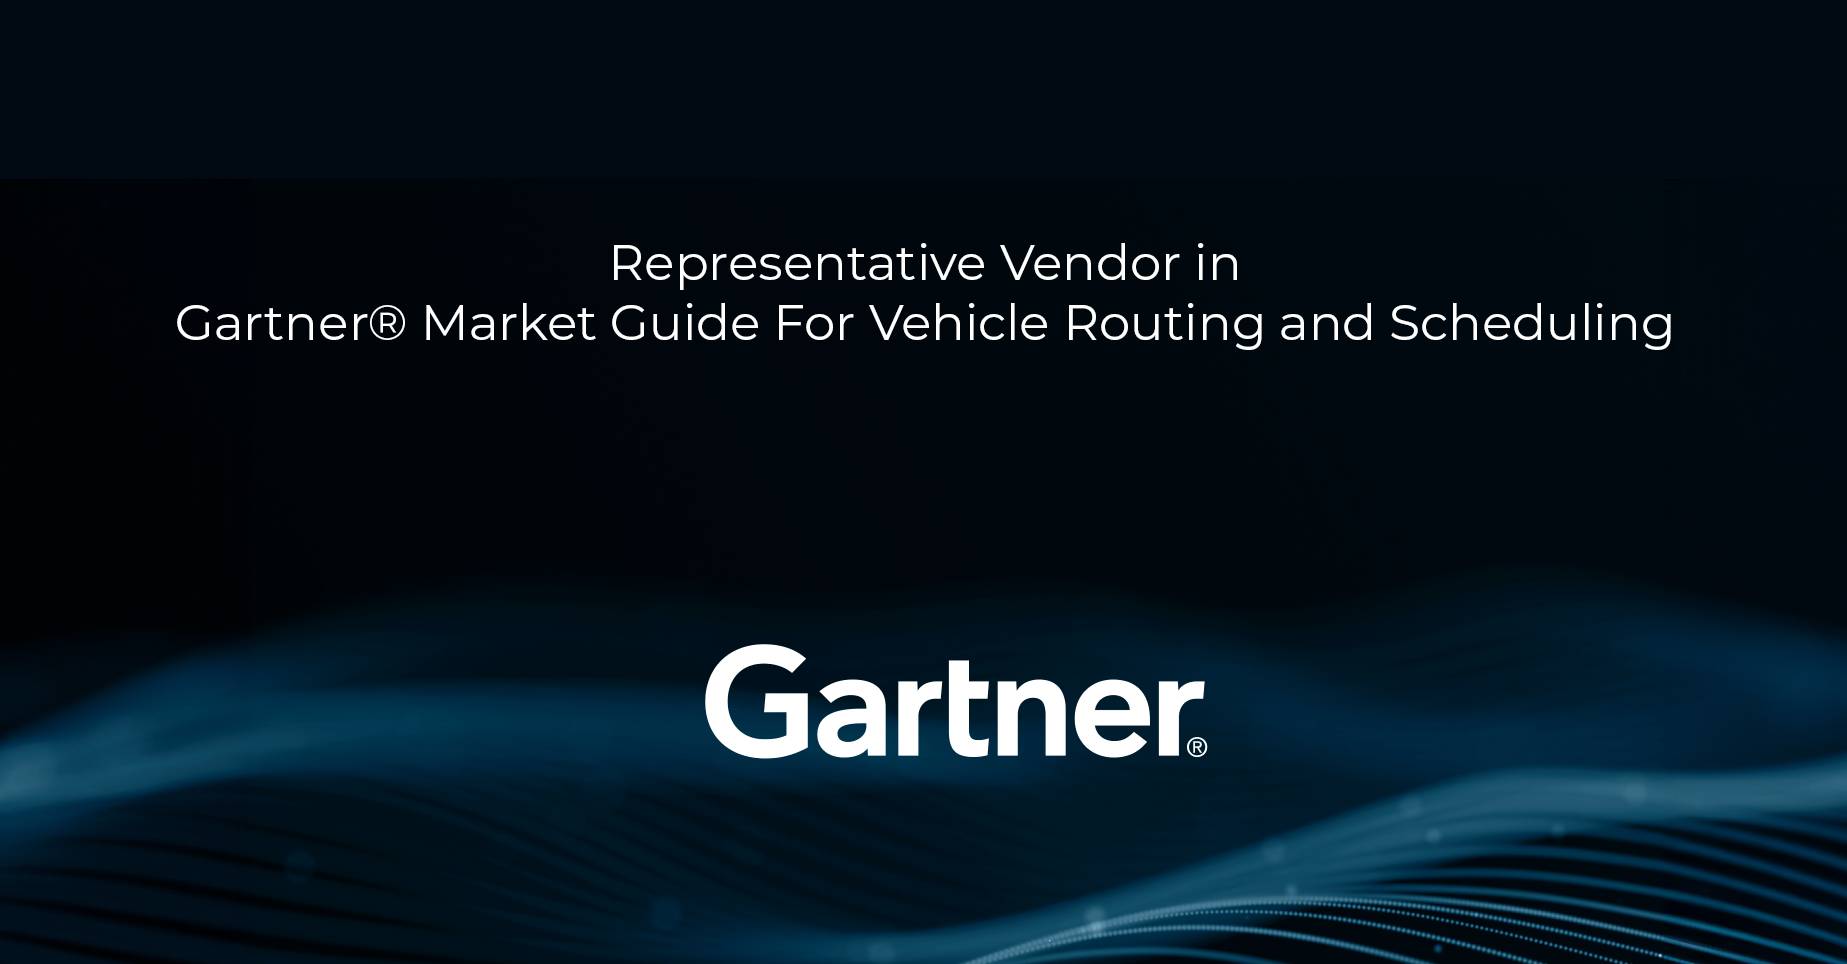 LogiNext named as representative vendor in market guide for vehicle routing and scheduling